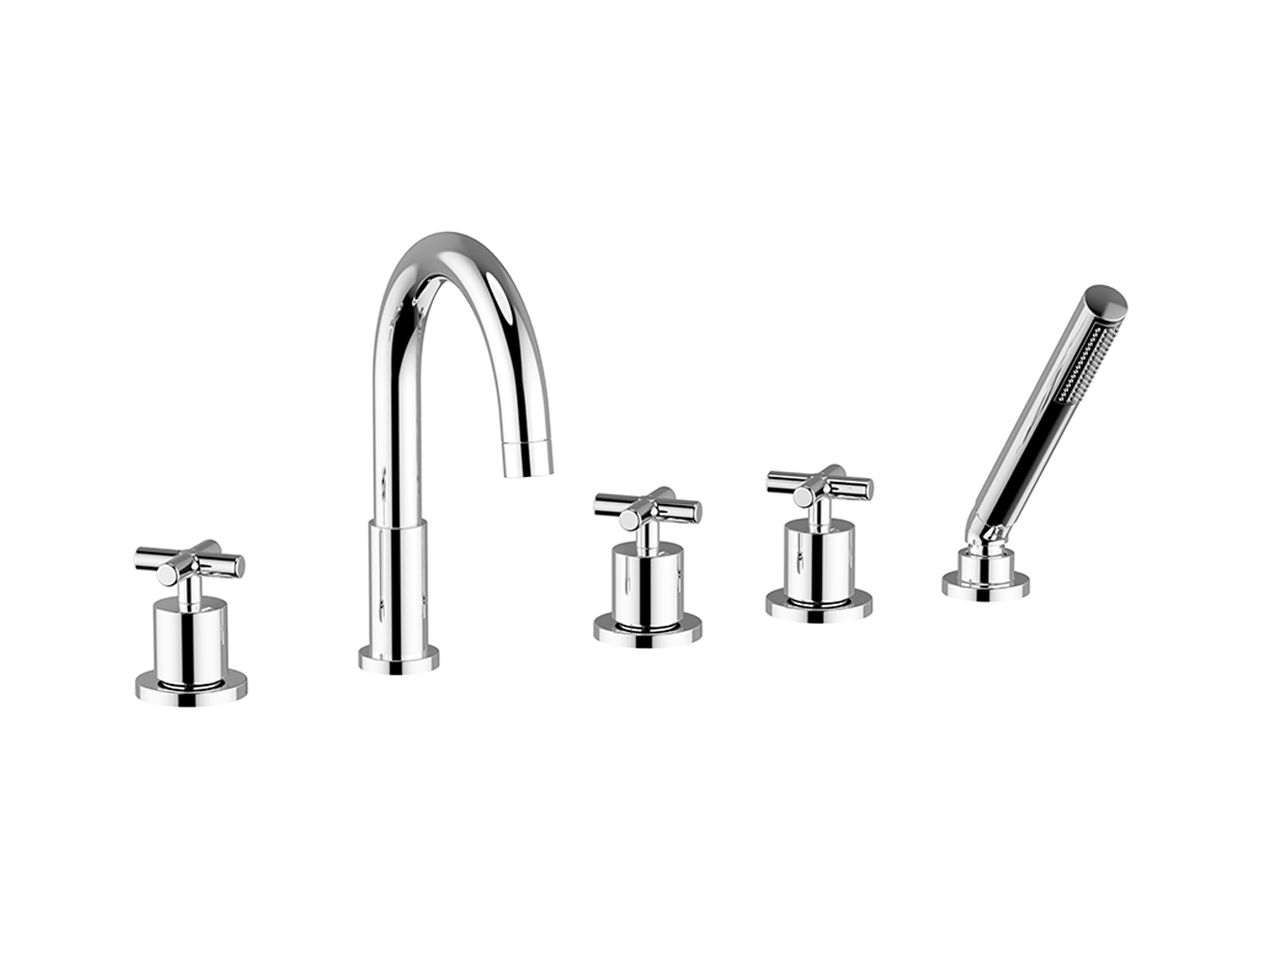 HUBERDeck-mounted 5-hole bath mixer SUITE